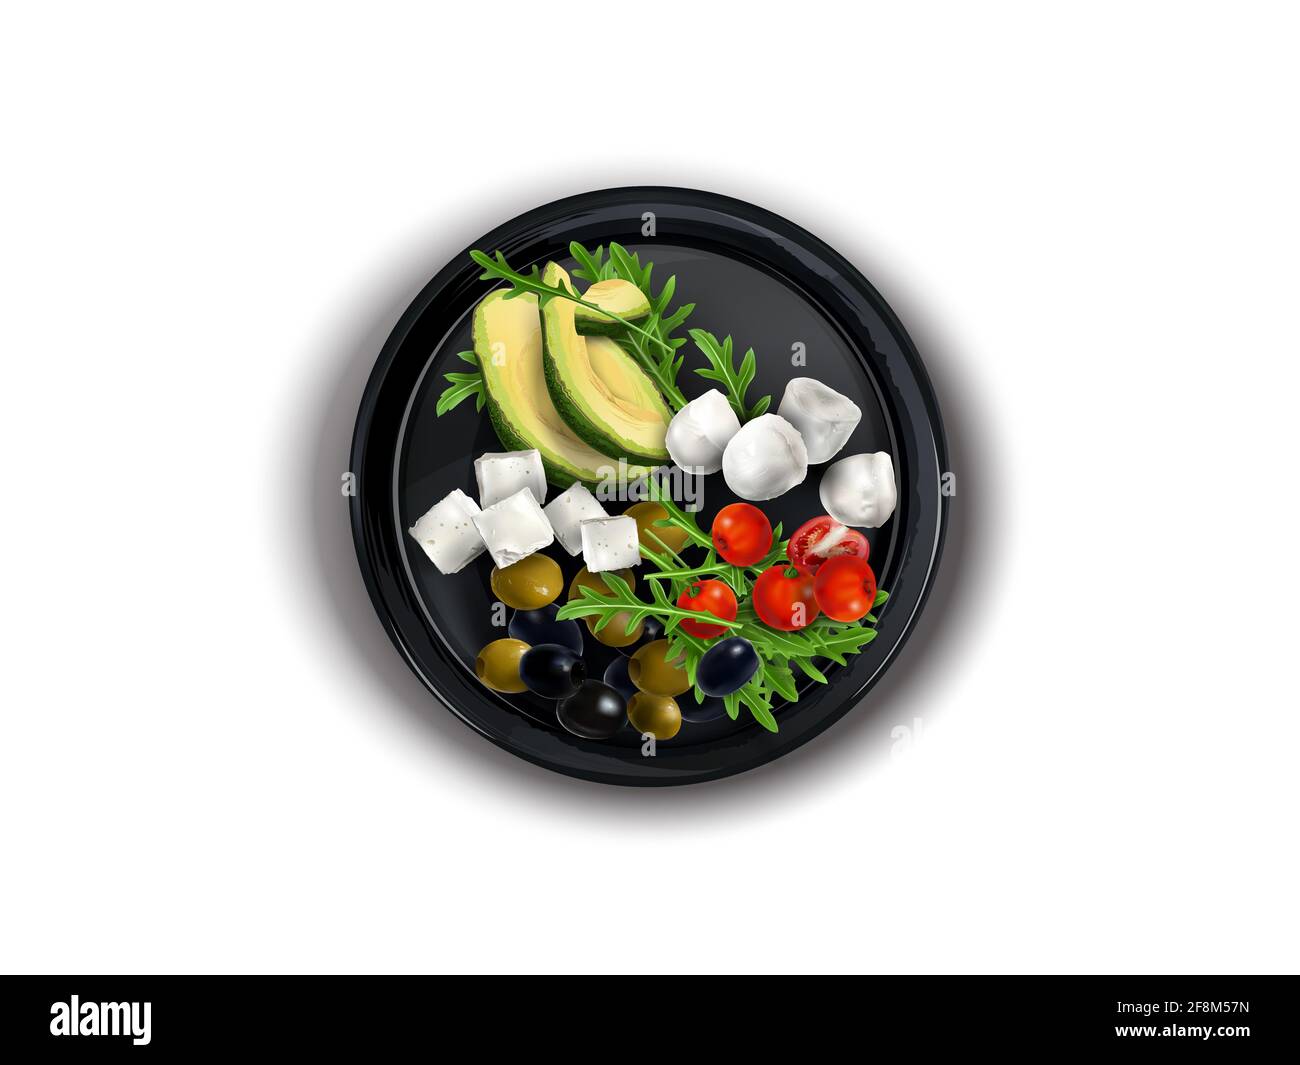 Feta and Mozzarella cheese with vegetables on a black plate. Stock Photo